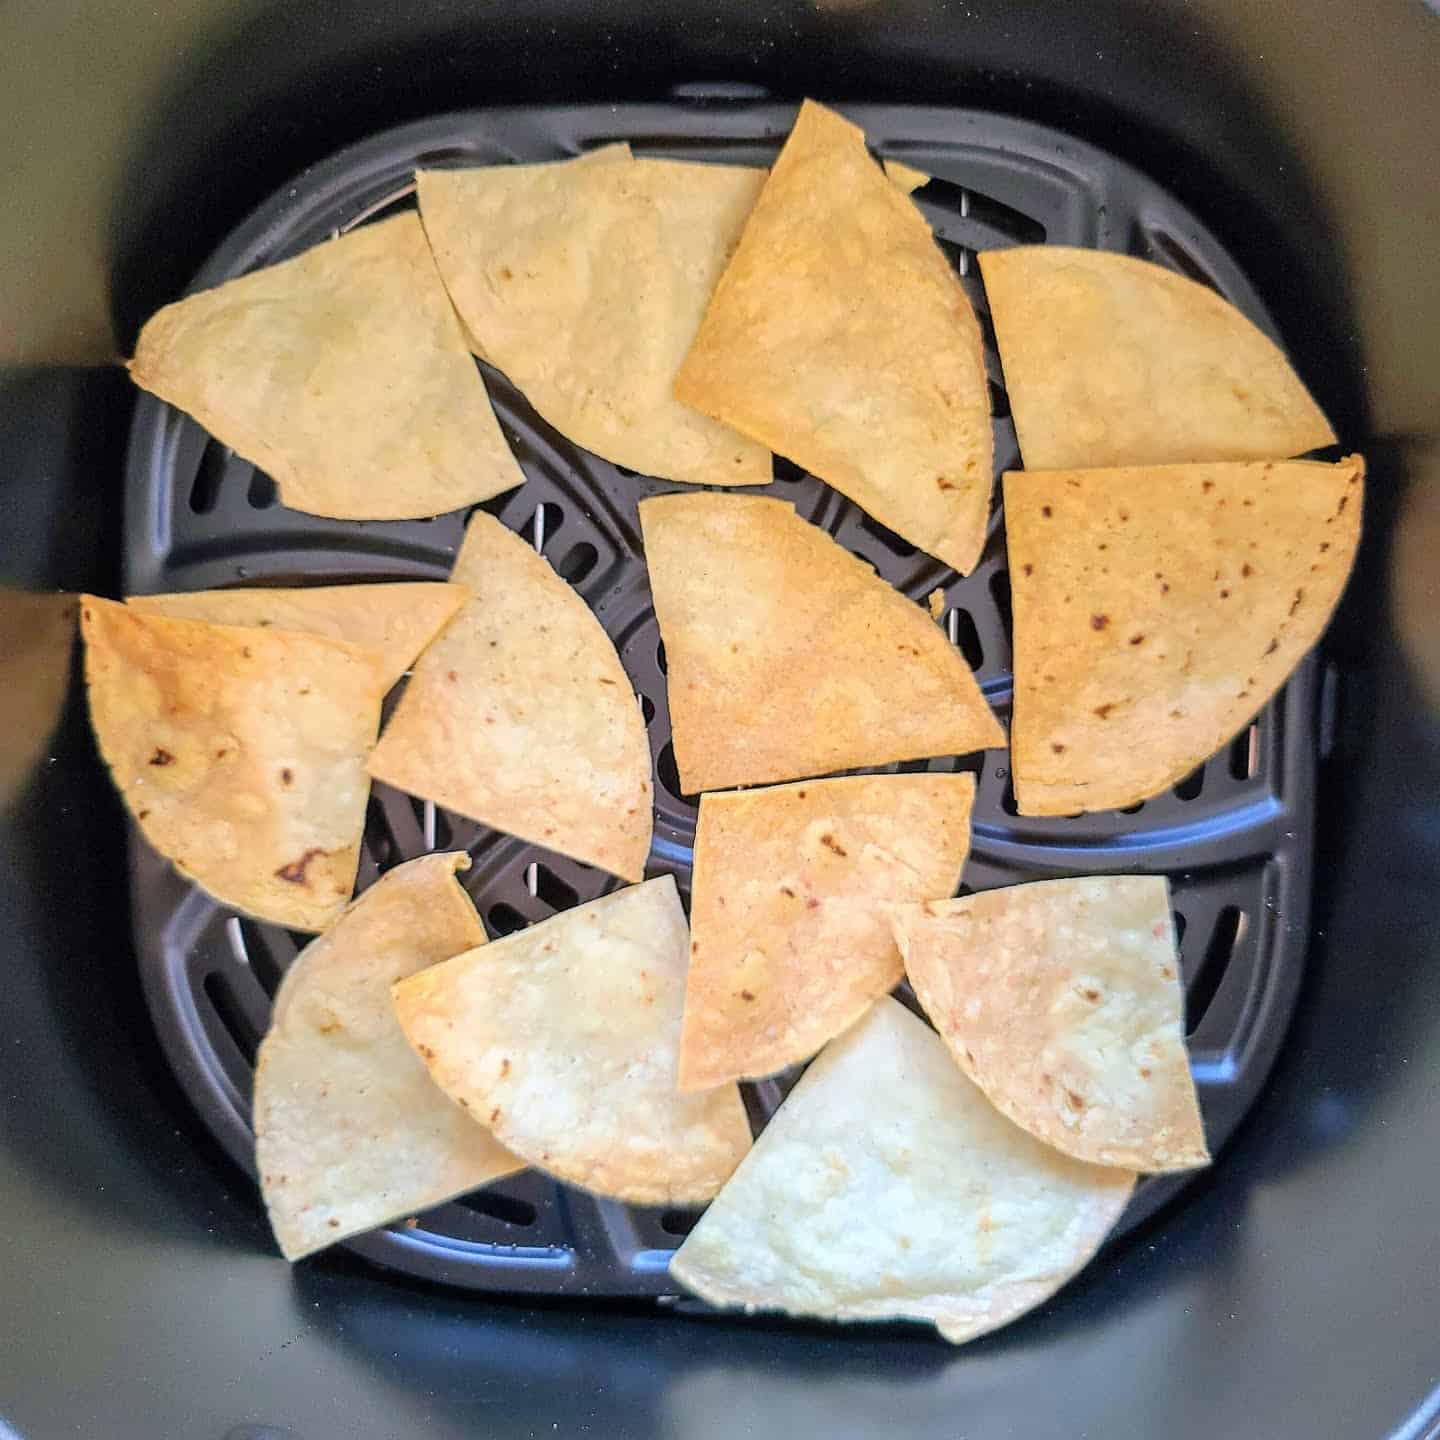 cooked tortillas chips in a air fryer